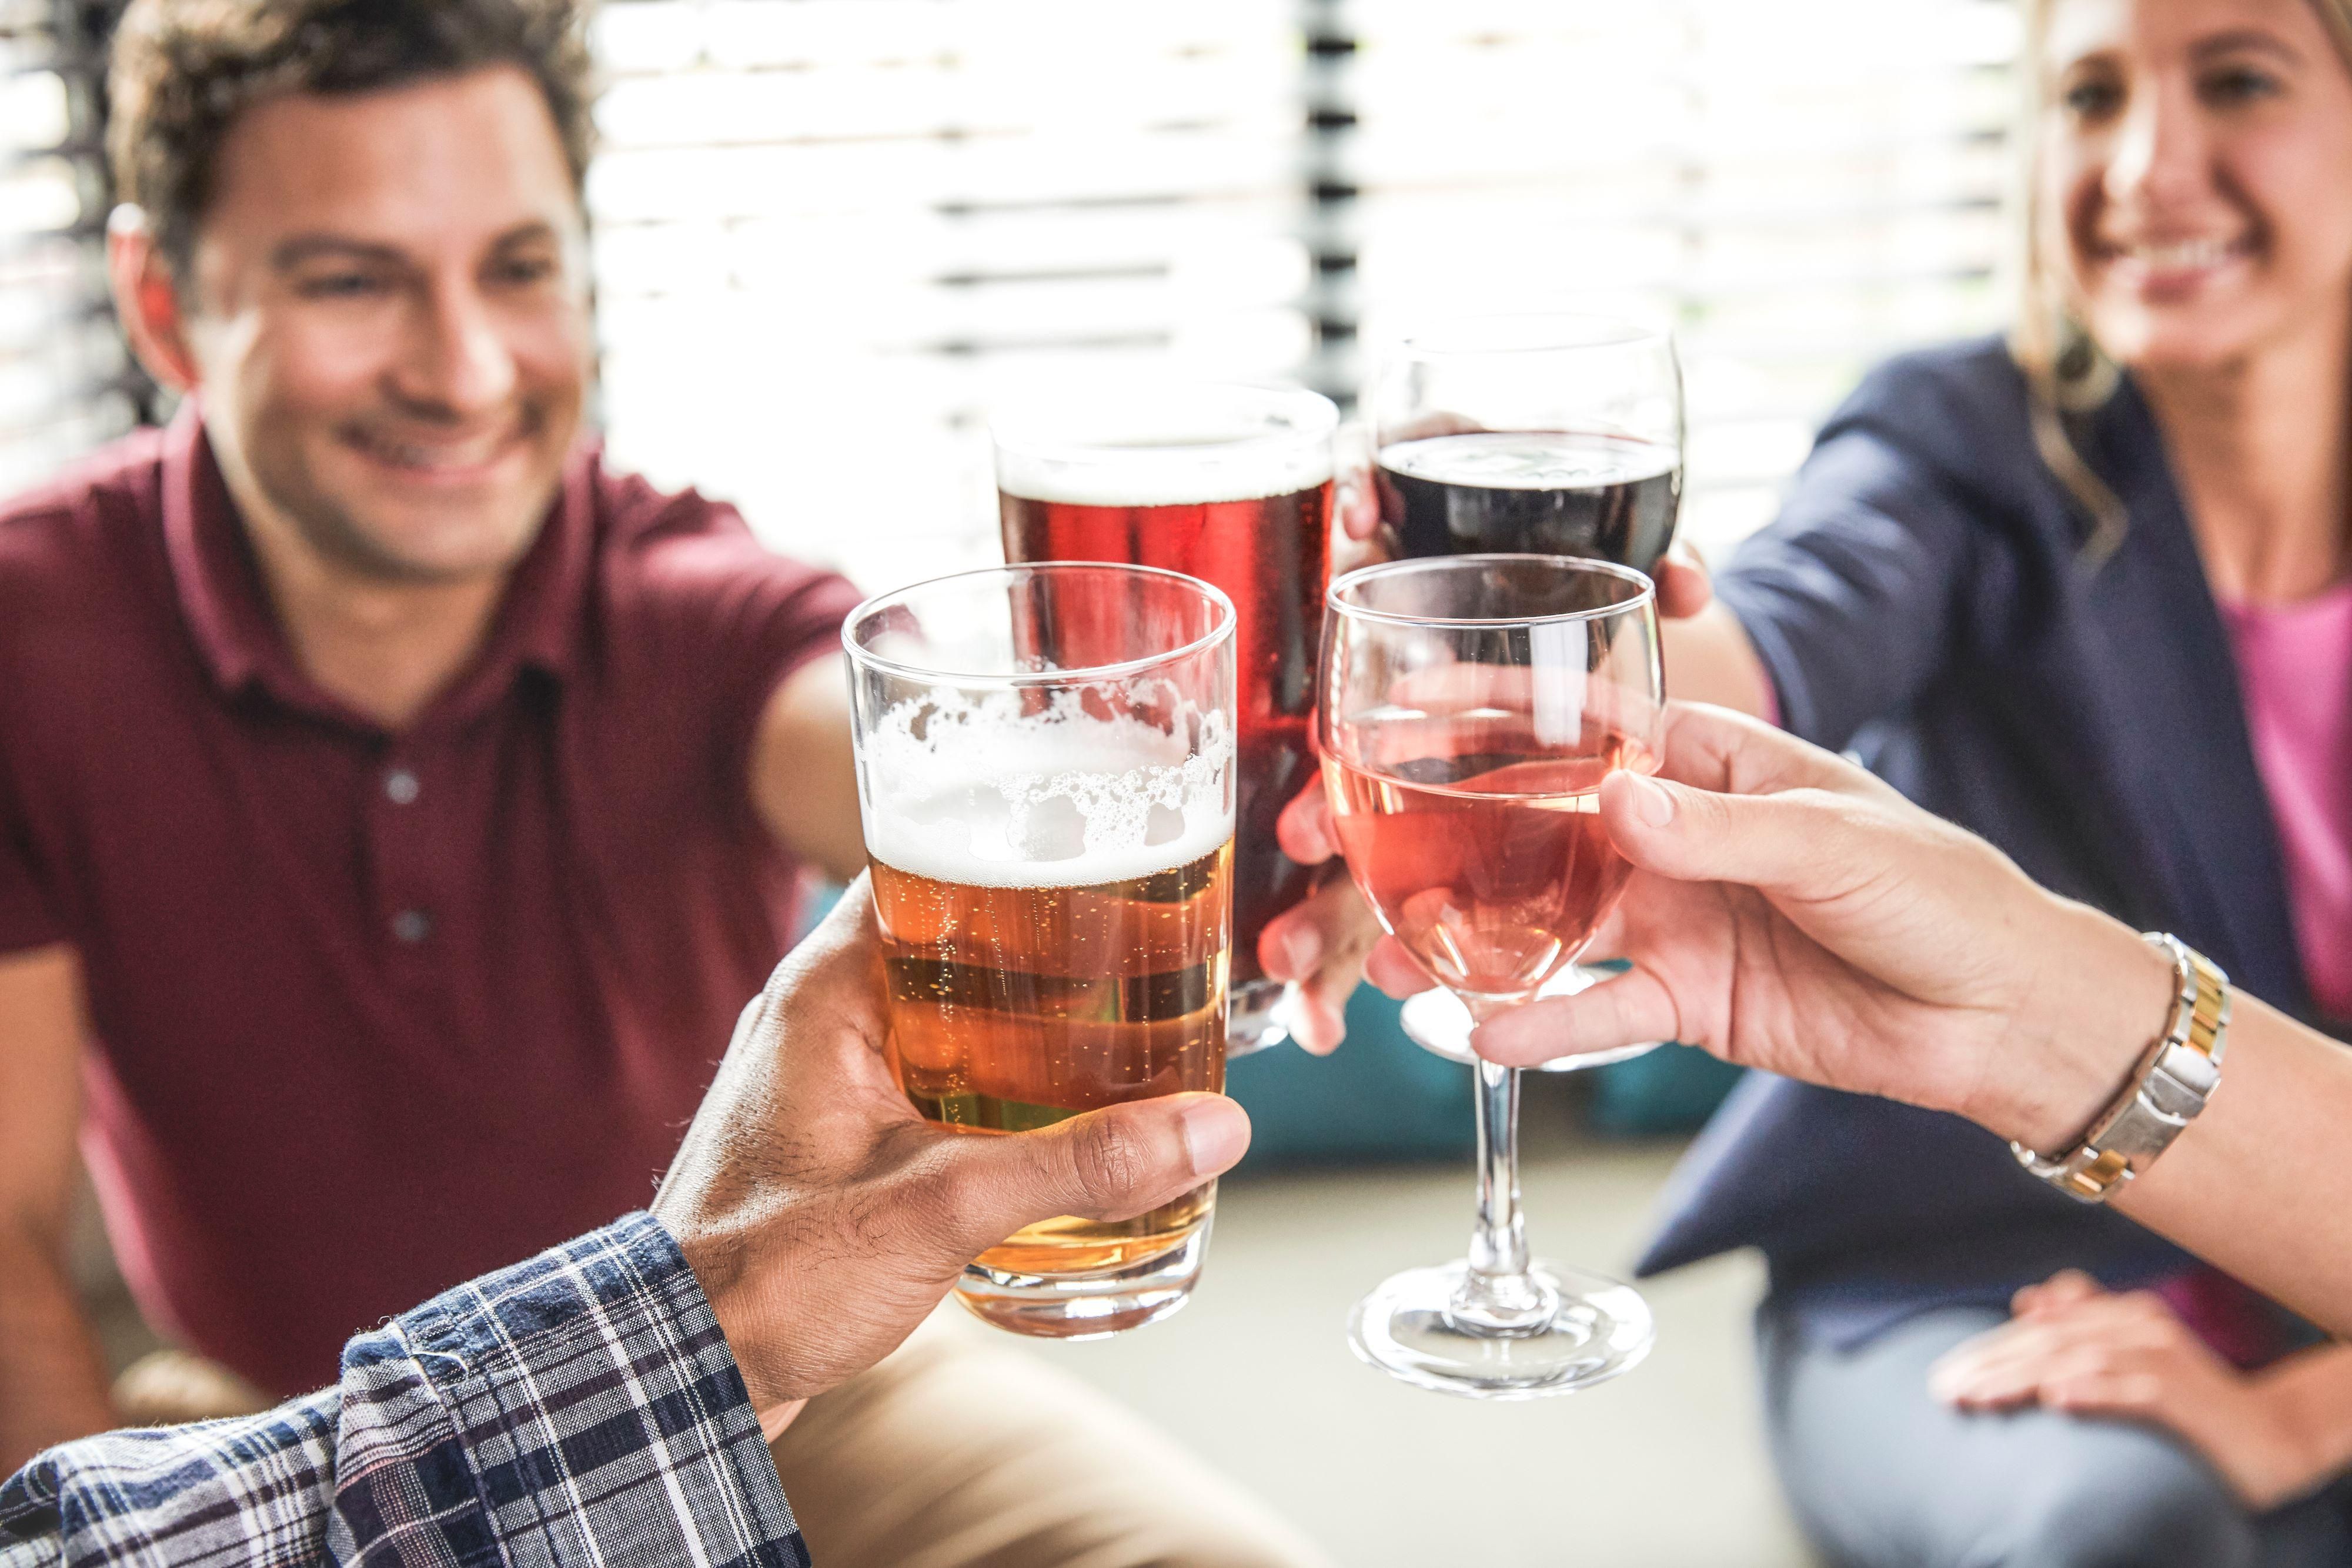 The Staybridge Suites Sioux City Southeast is pleased to offer our guests a complimentary evening Social Reception Monday through Wednesday featuring beer, wine and snacks.